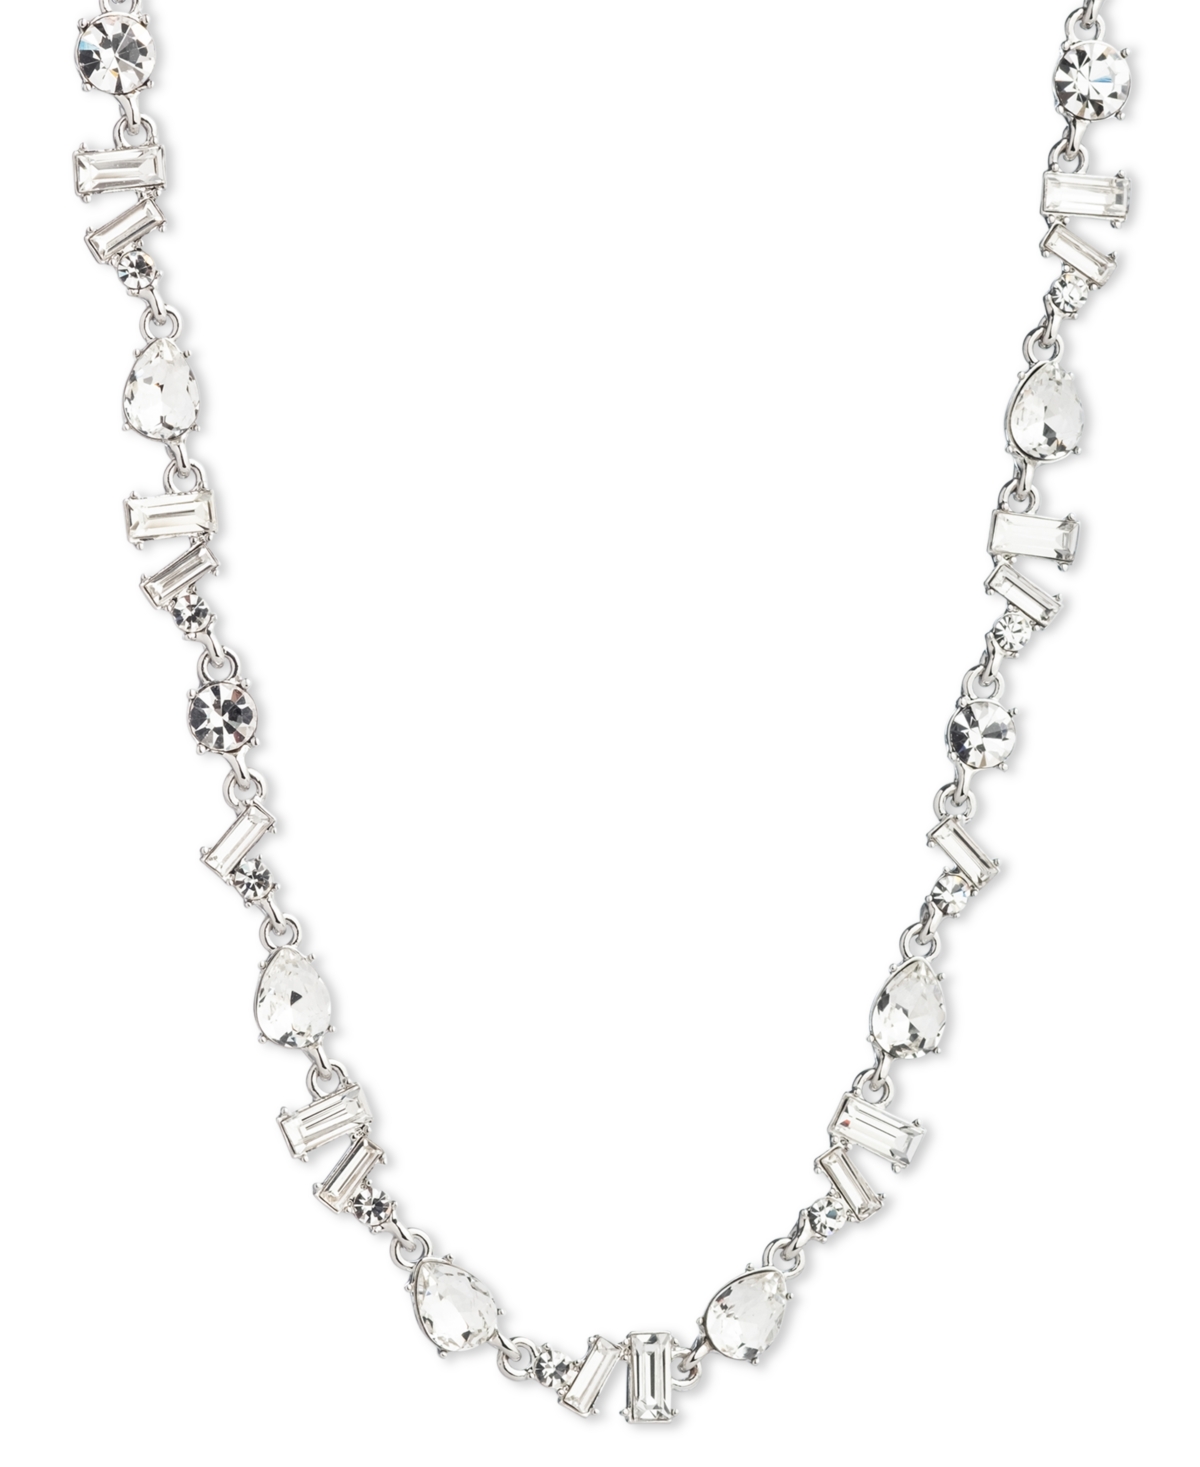 Mixed-Cut Crystal Collar Necklace, 16" + 3" extender - Crystal Wh